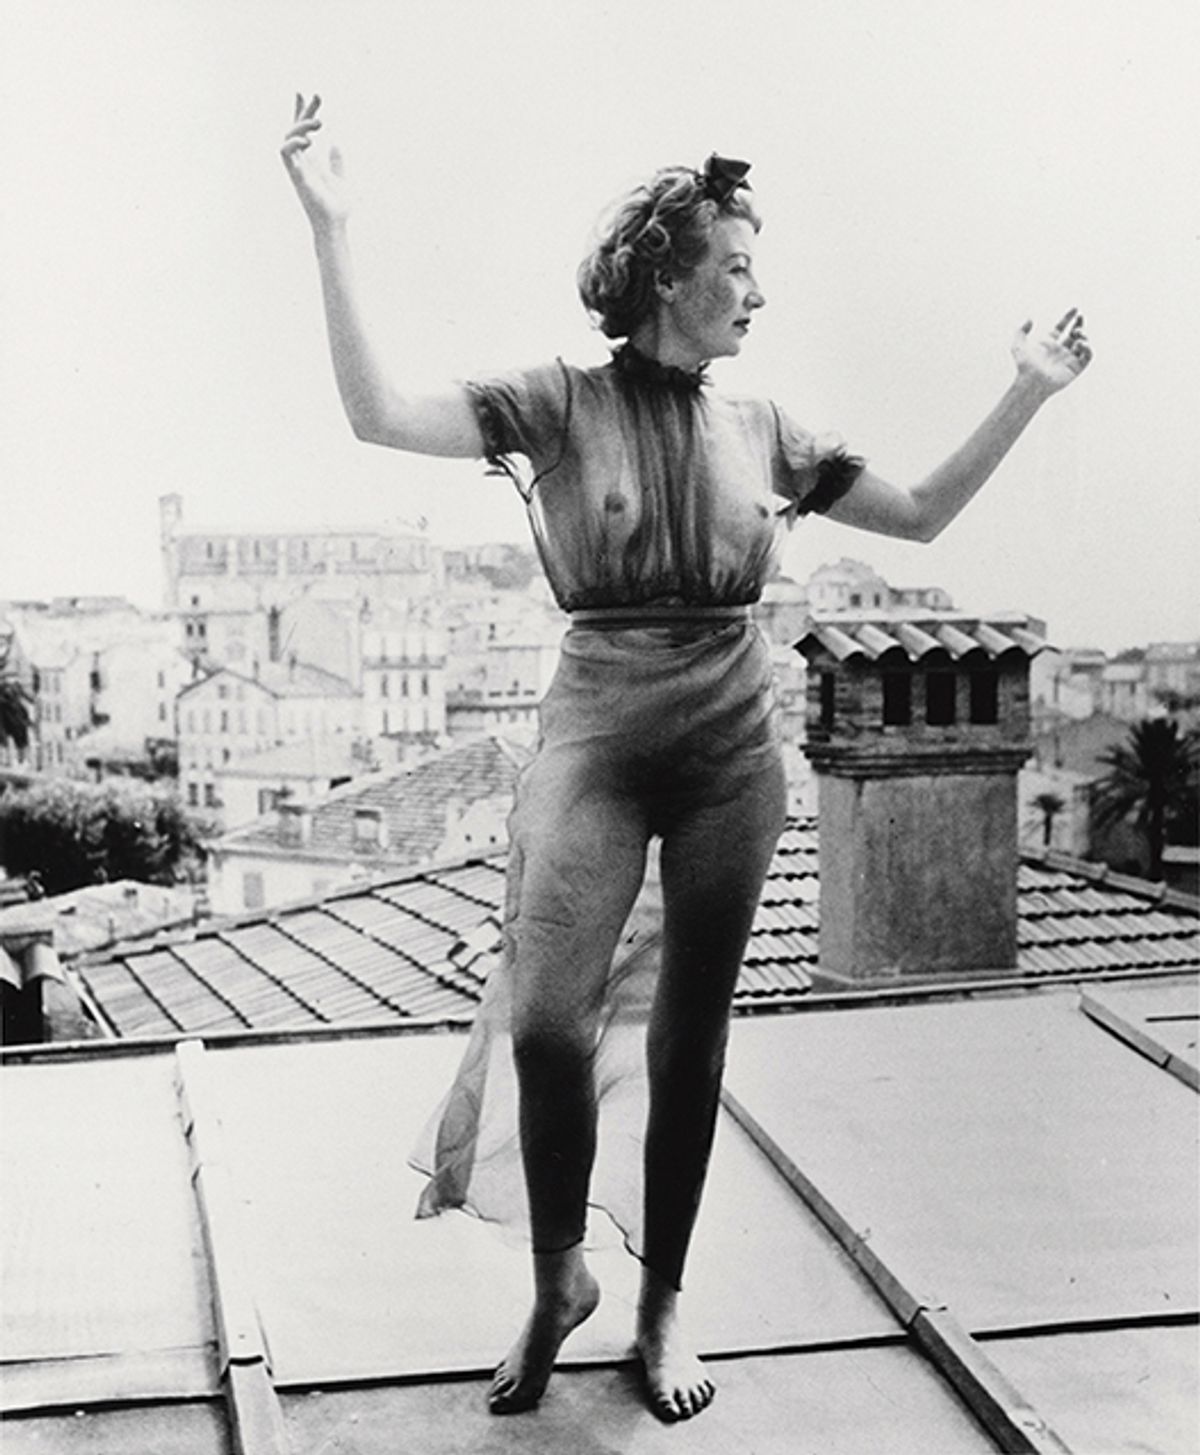 Free spirit: Eileen Agar dancing on a roof outside Mougins, France, in 1937
Courtesy the Estate of Eileen Agar